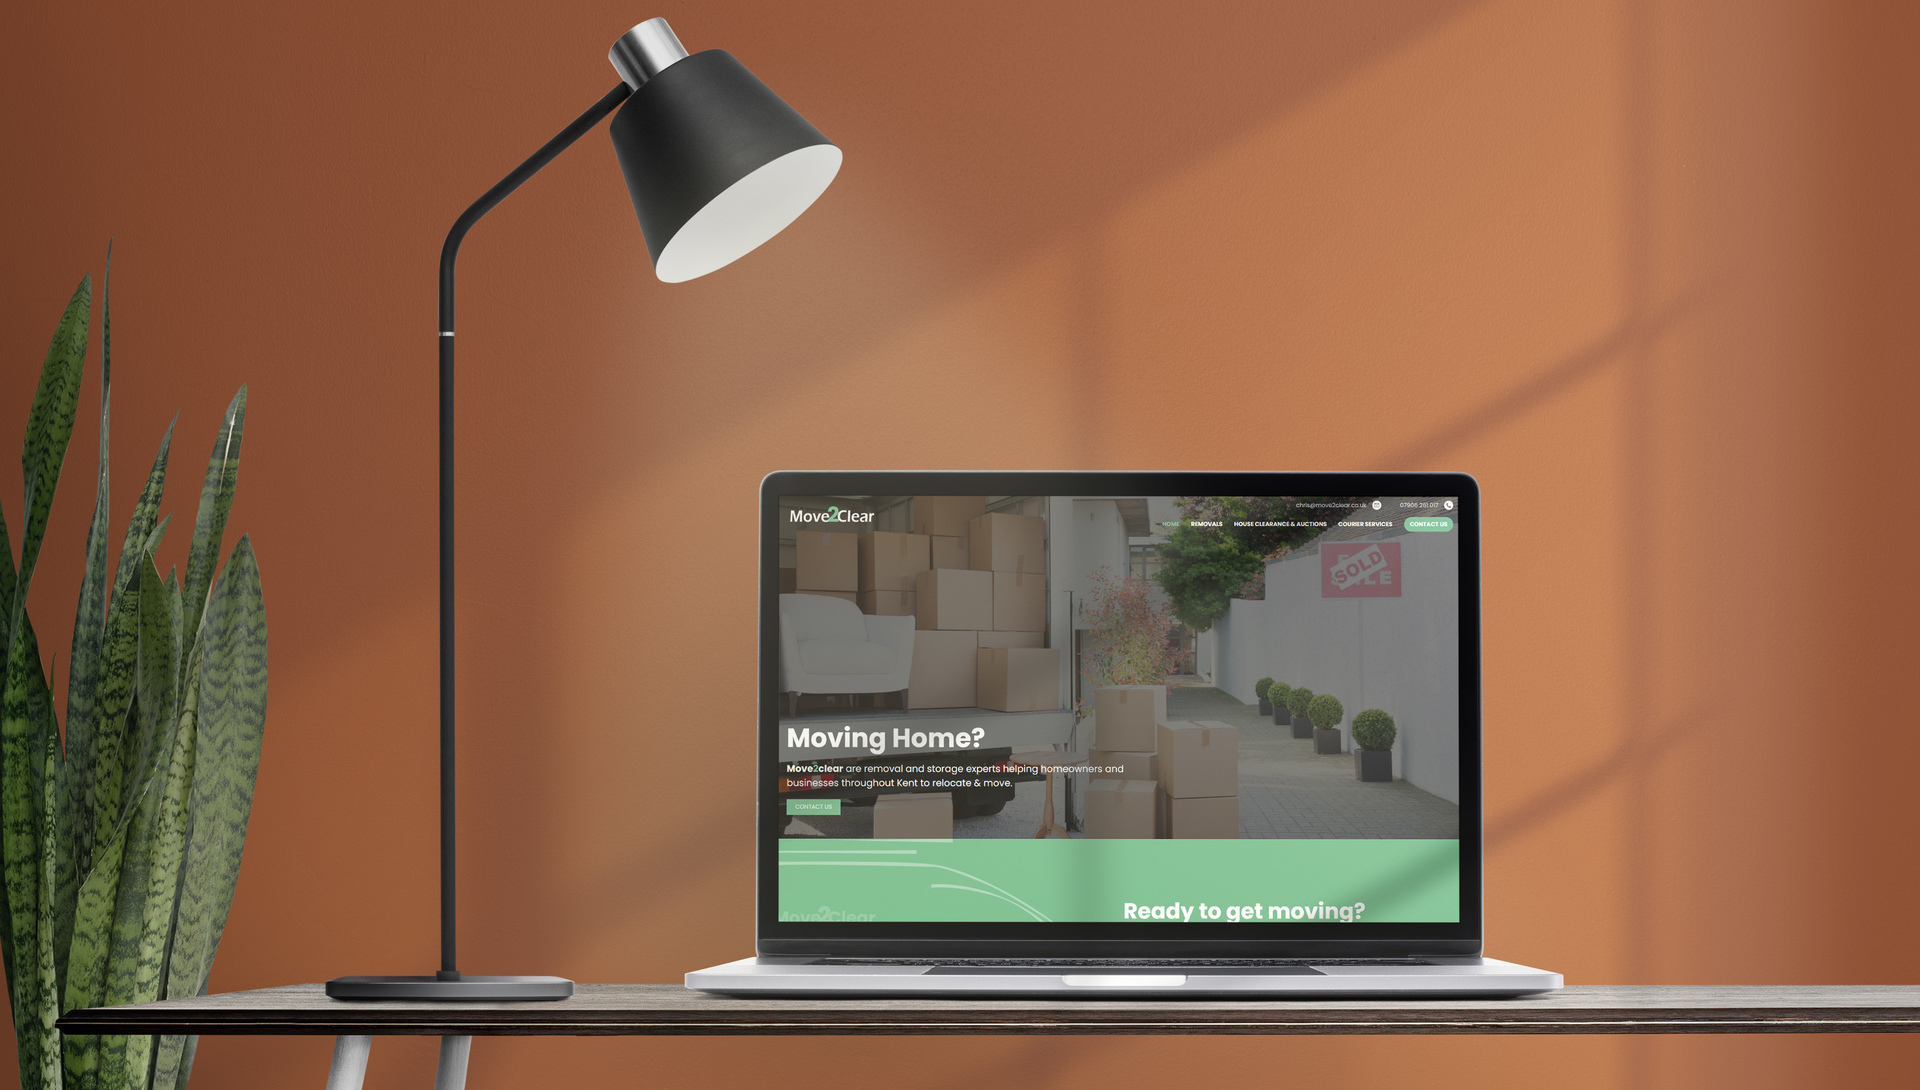 A web design shown on a laptop with a lamp and plant against an orange background